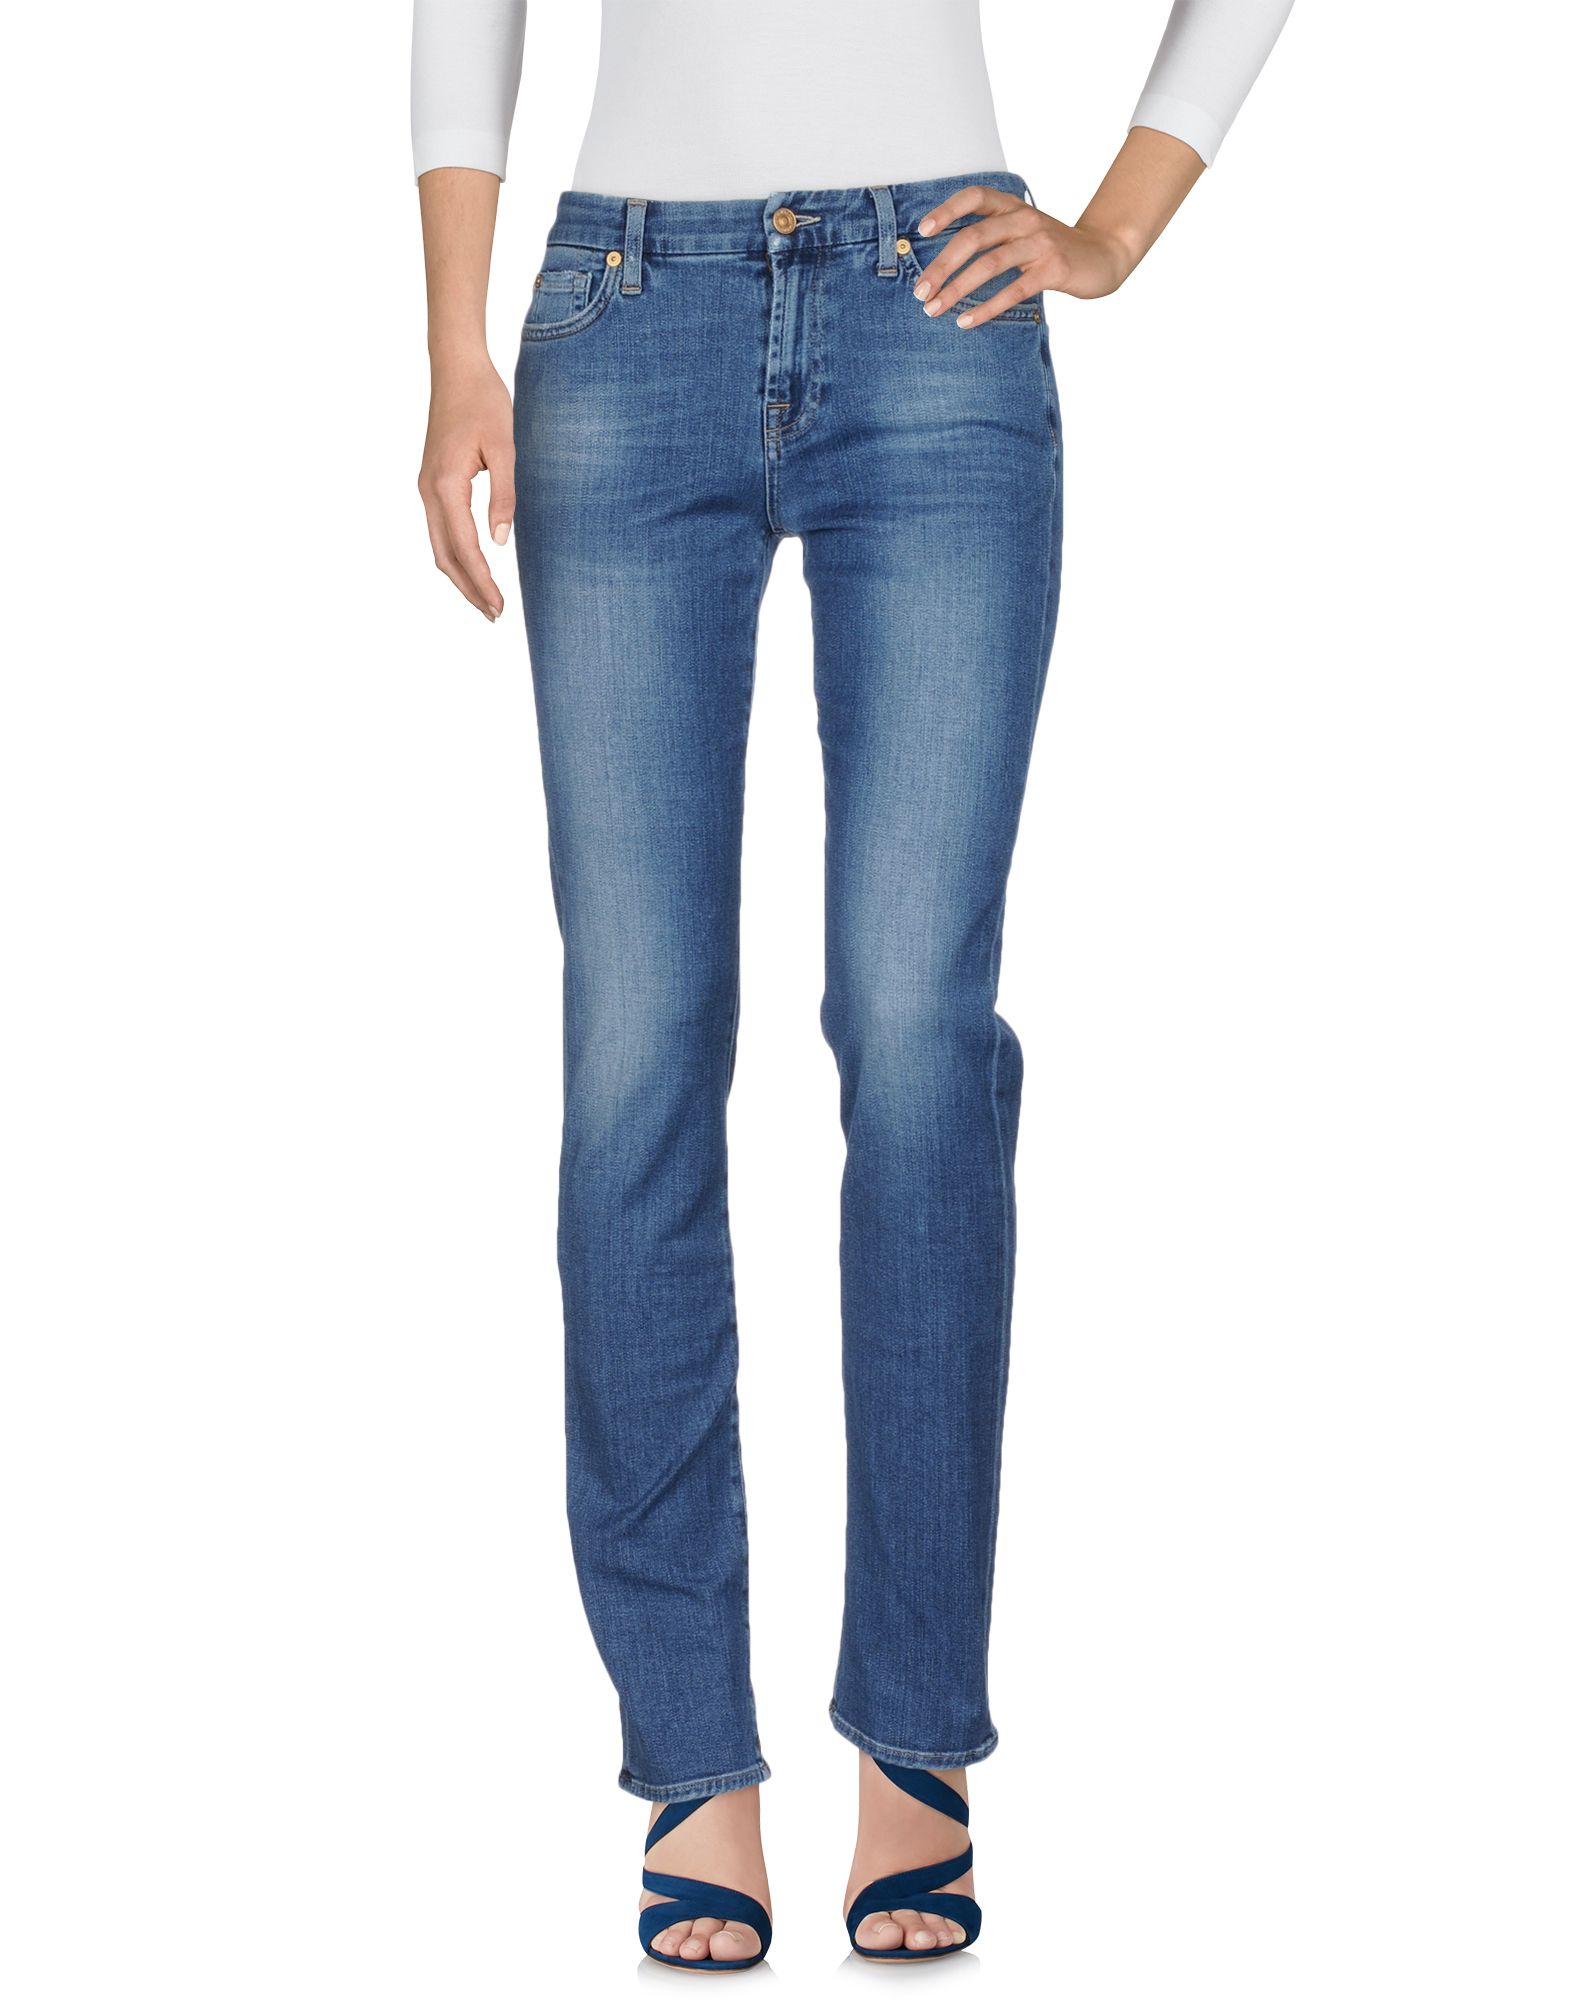 7 FOR ALL MANKIND Denim pants,42666500FD 3